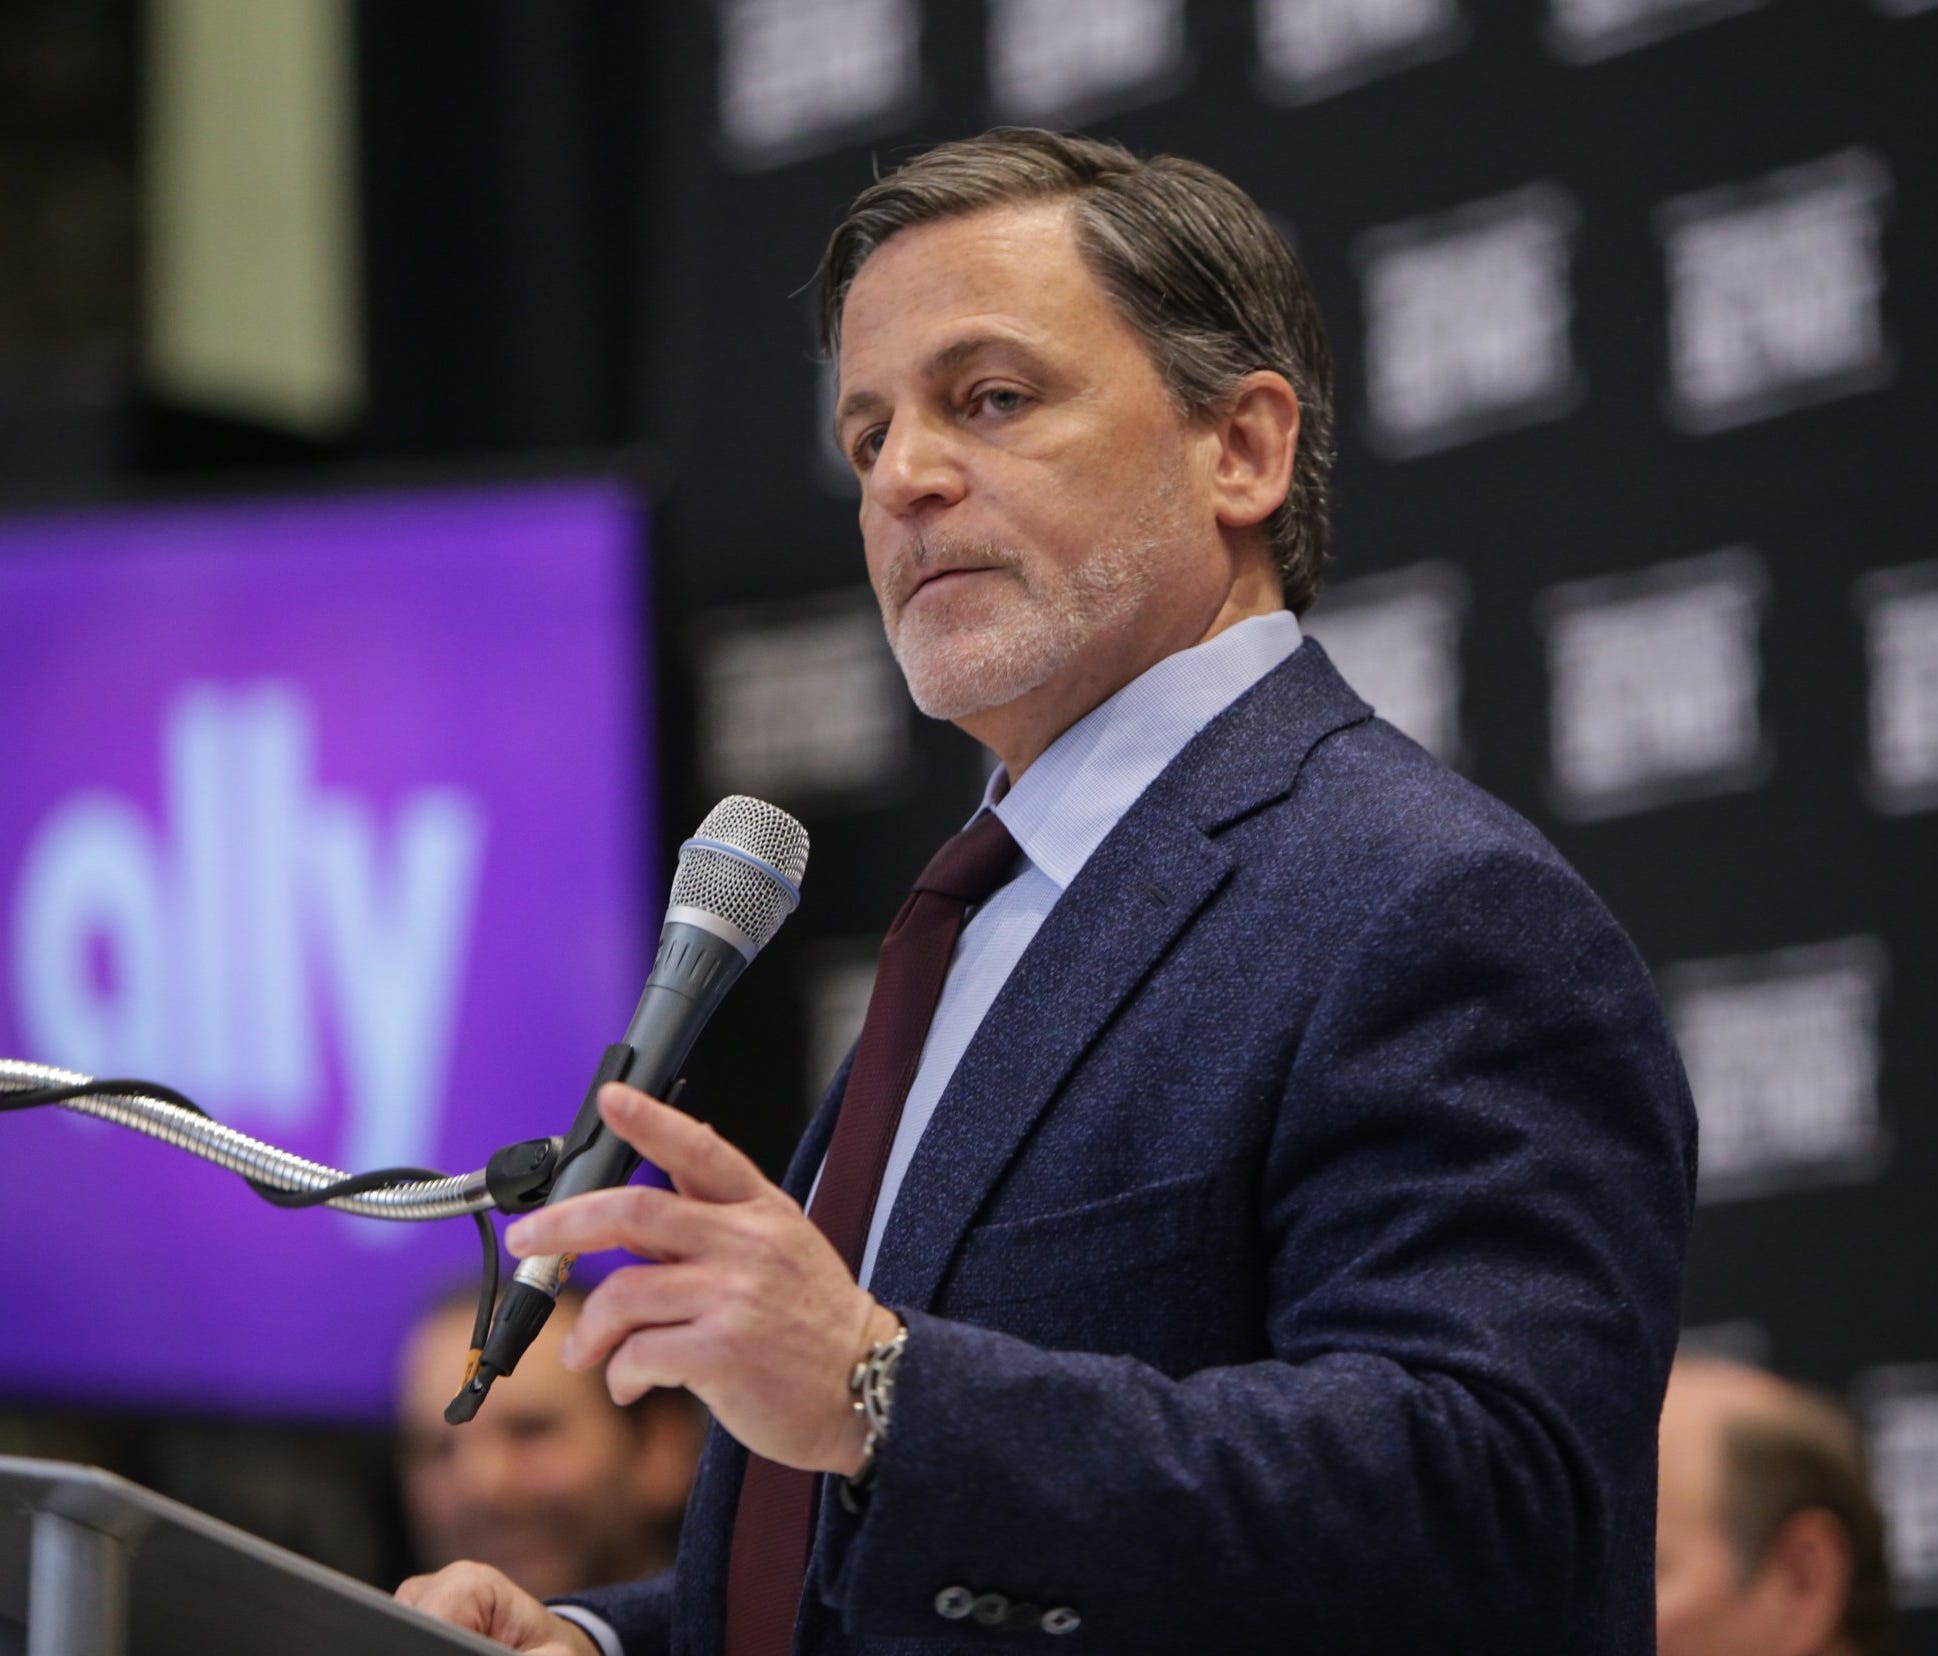 Quicken Loans founder and chairman Dan Gilbert speaks during a press conference at One Detroit Center in downtown Detroit on Tuesday March 31, 2015 while announcing the purchase of the downtown skyscraper.